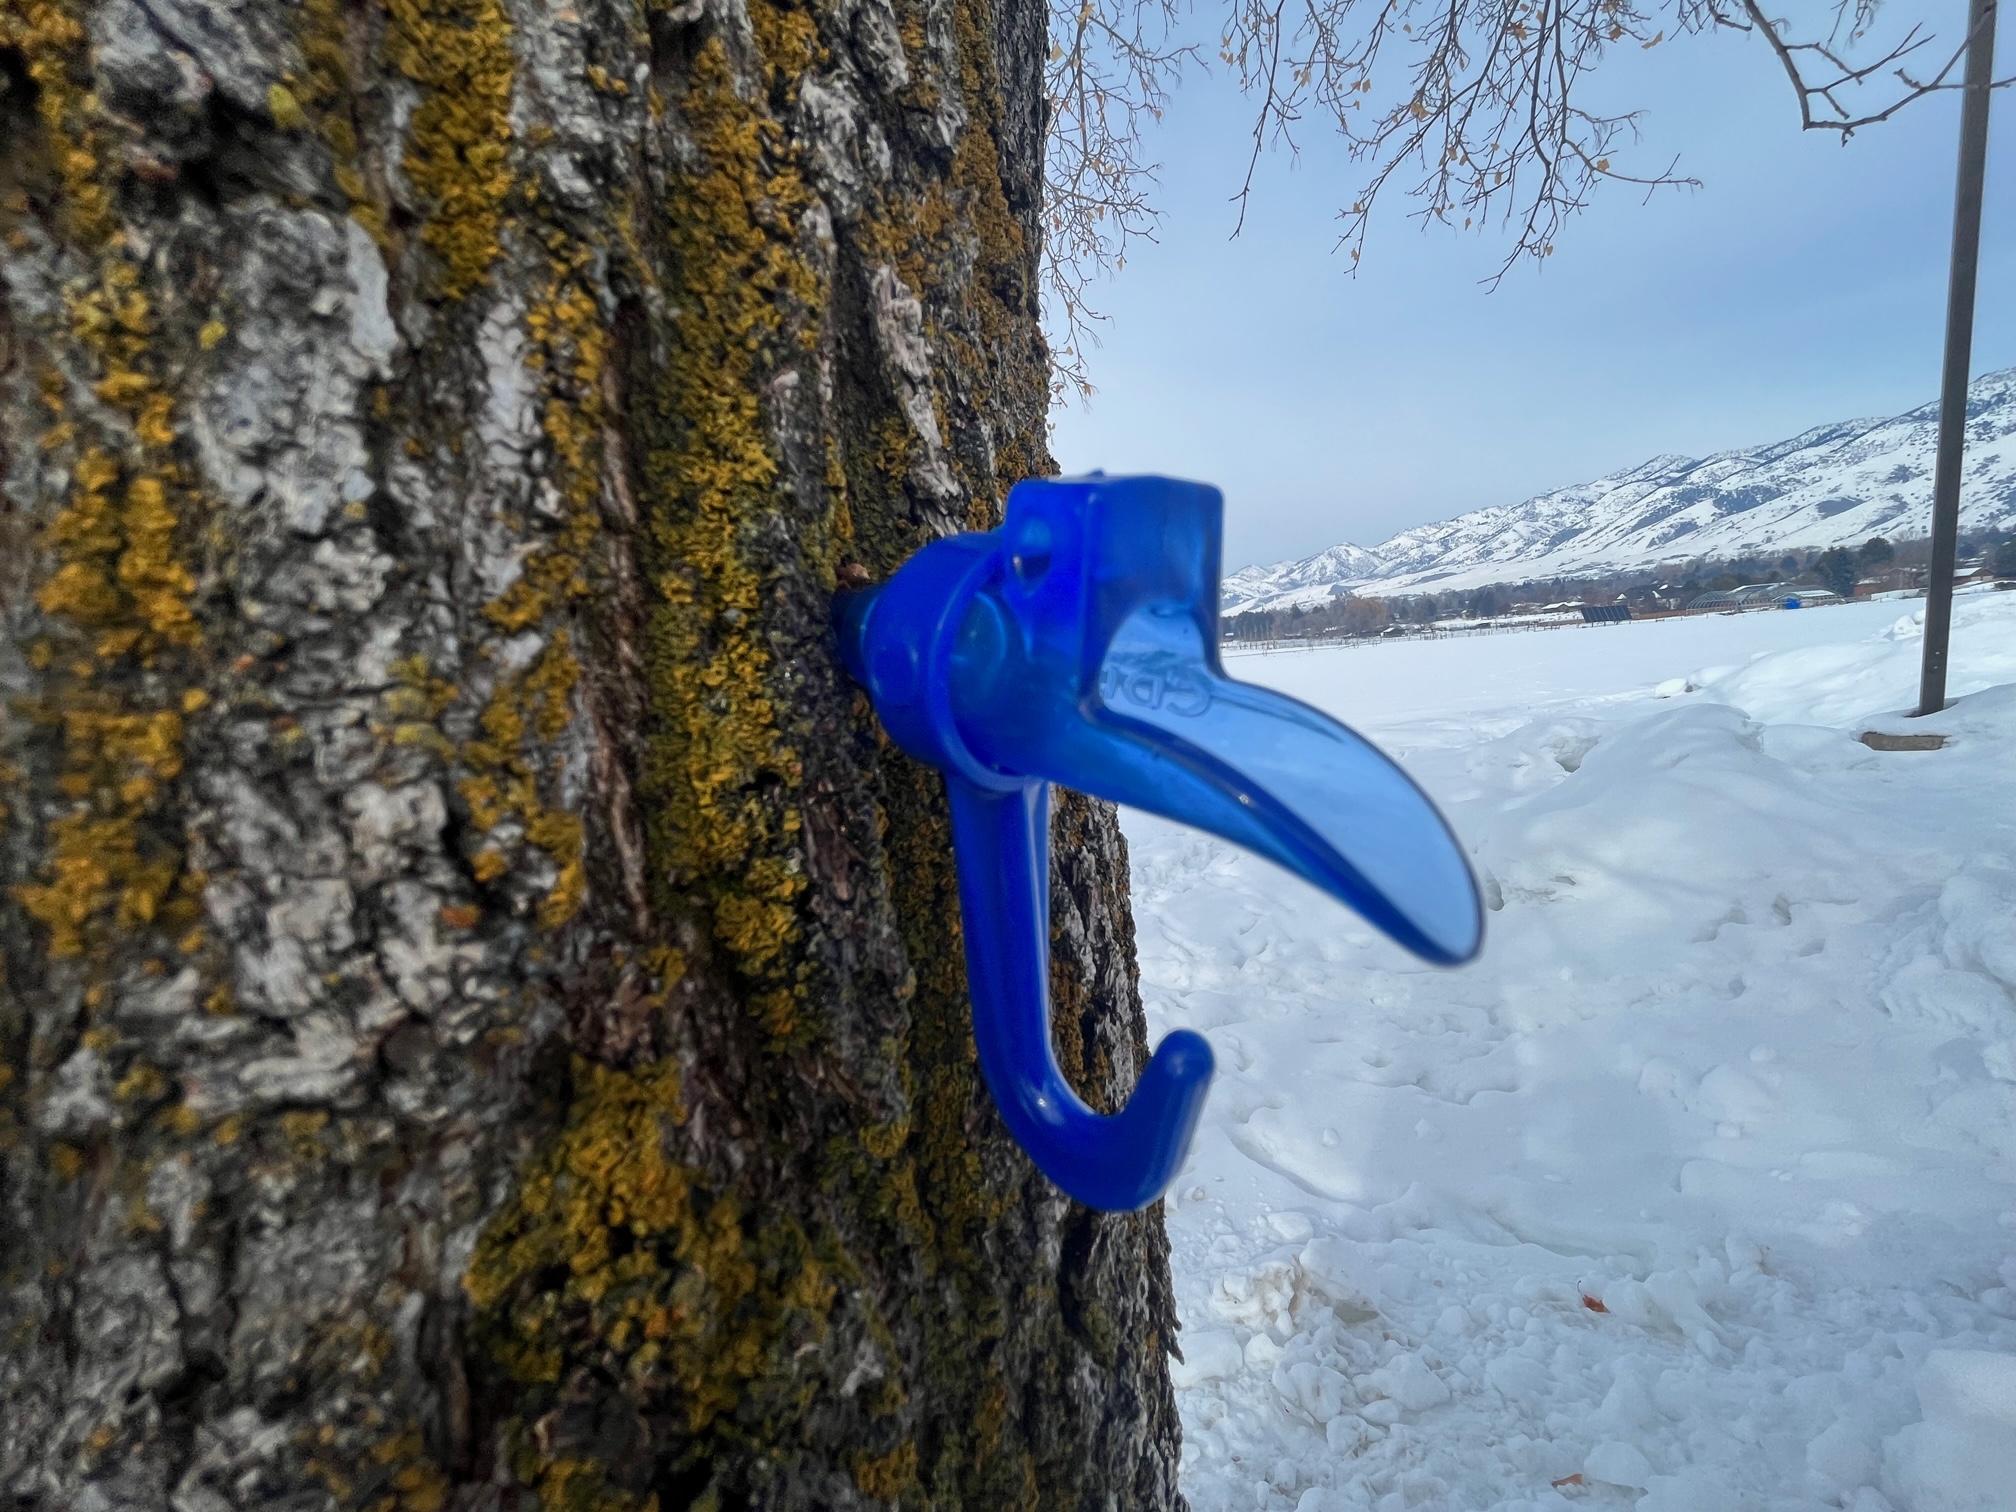 A blue plastic spile in a tree